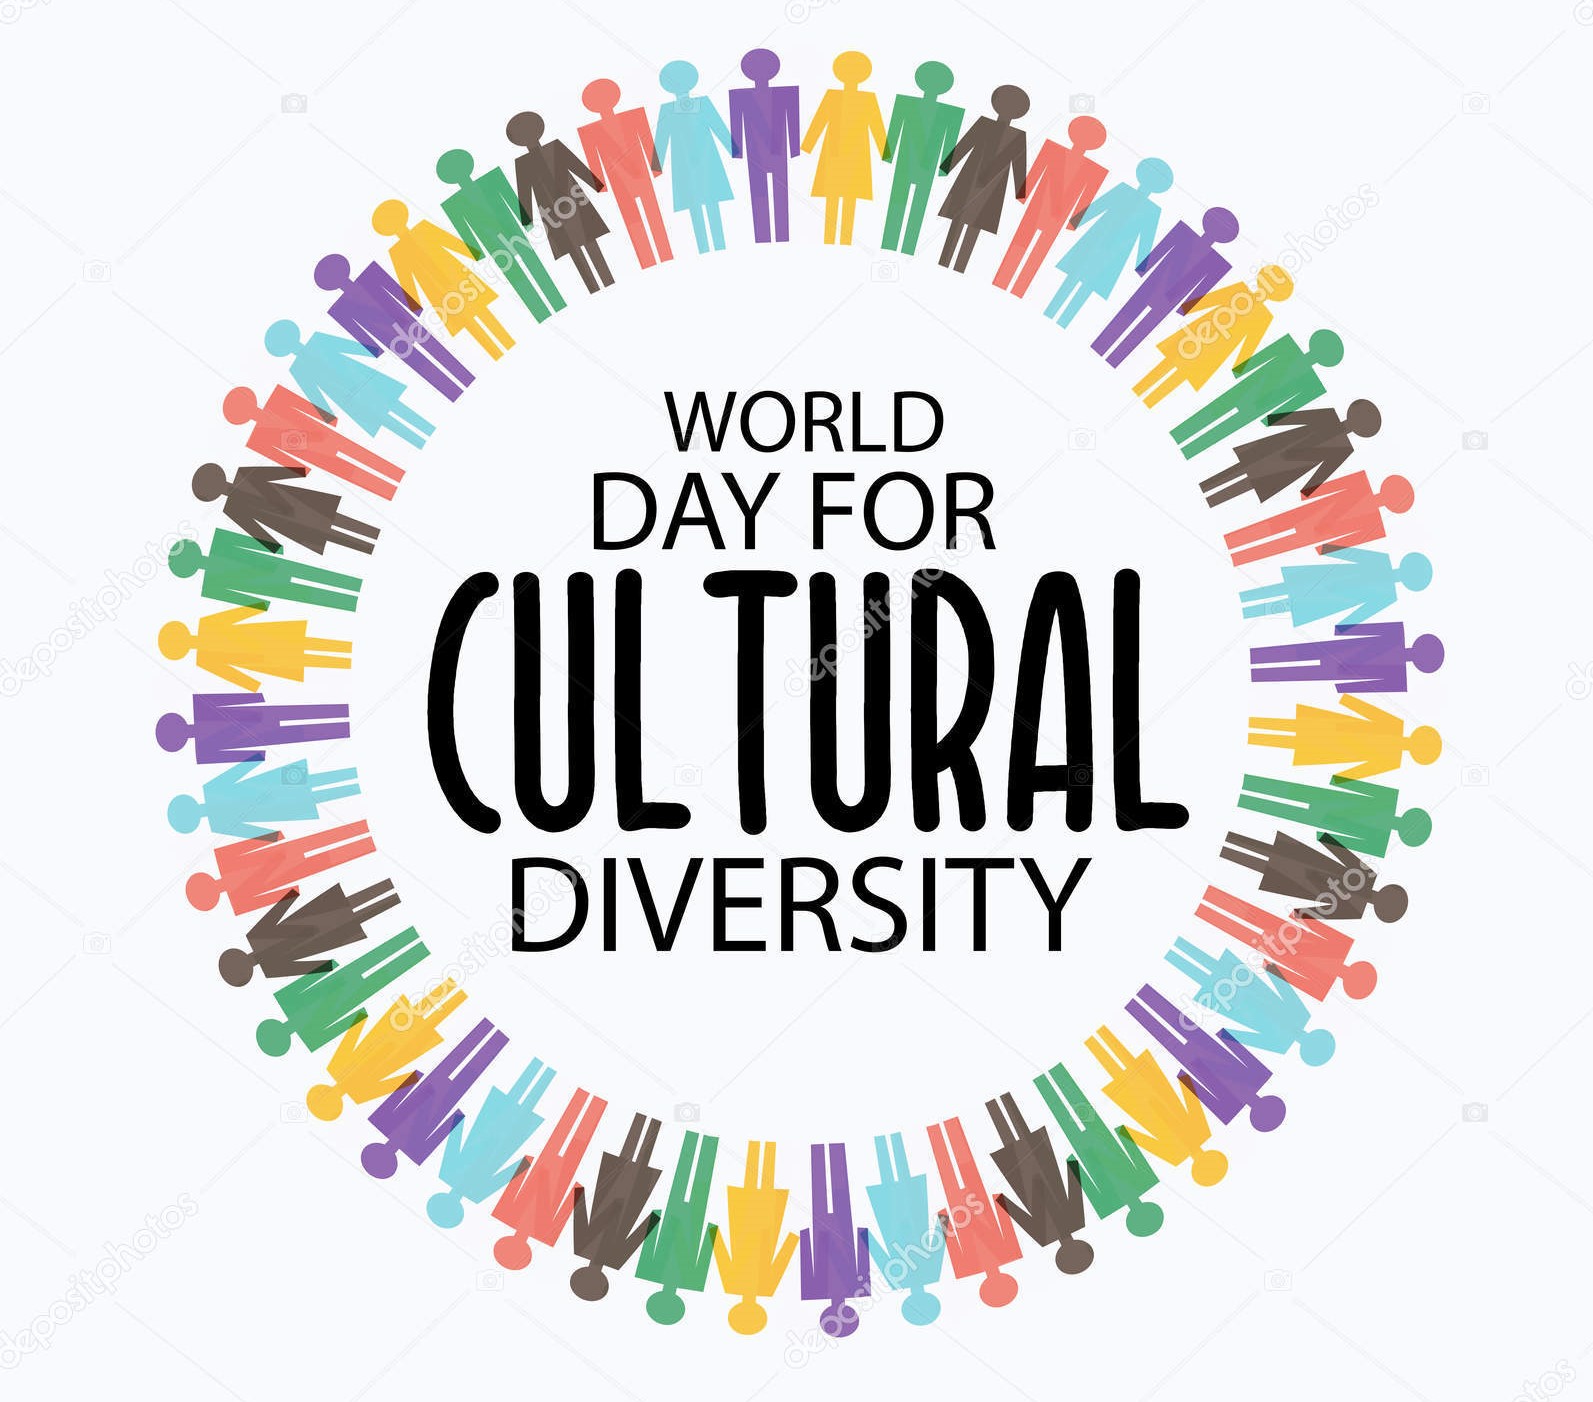 World Day For Cultural Diversity - Social Media Events